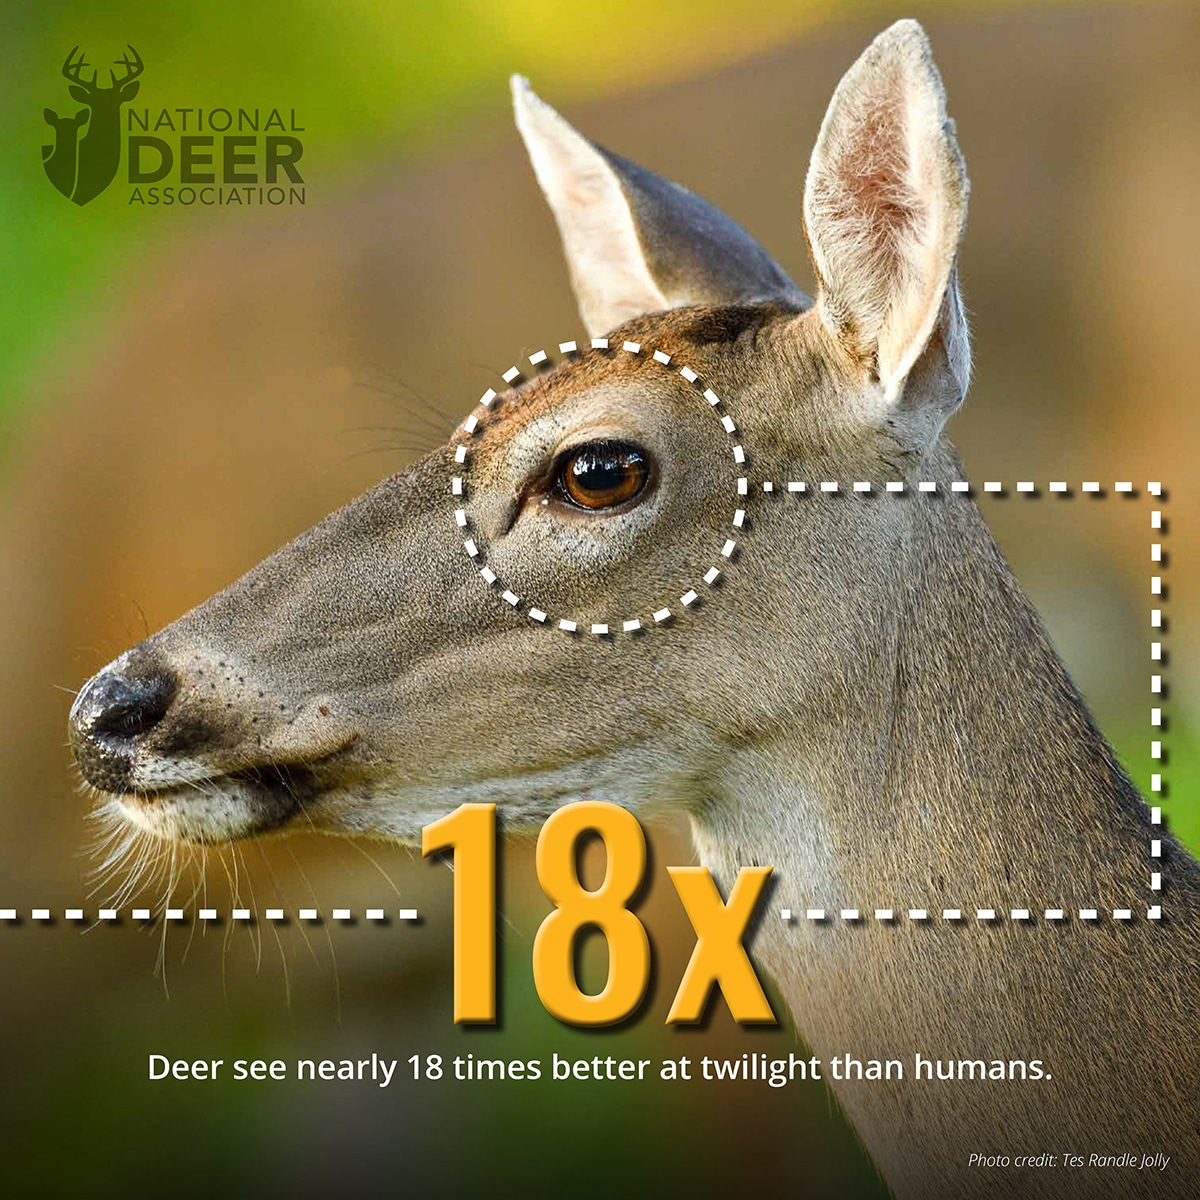 18x deer vision 7 Facts About Deer Vision Hunters Should See